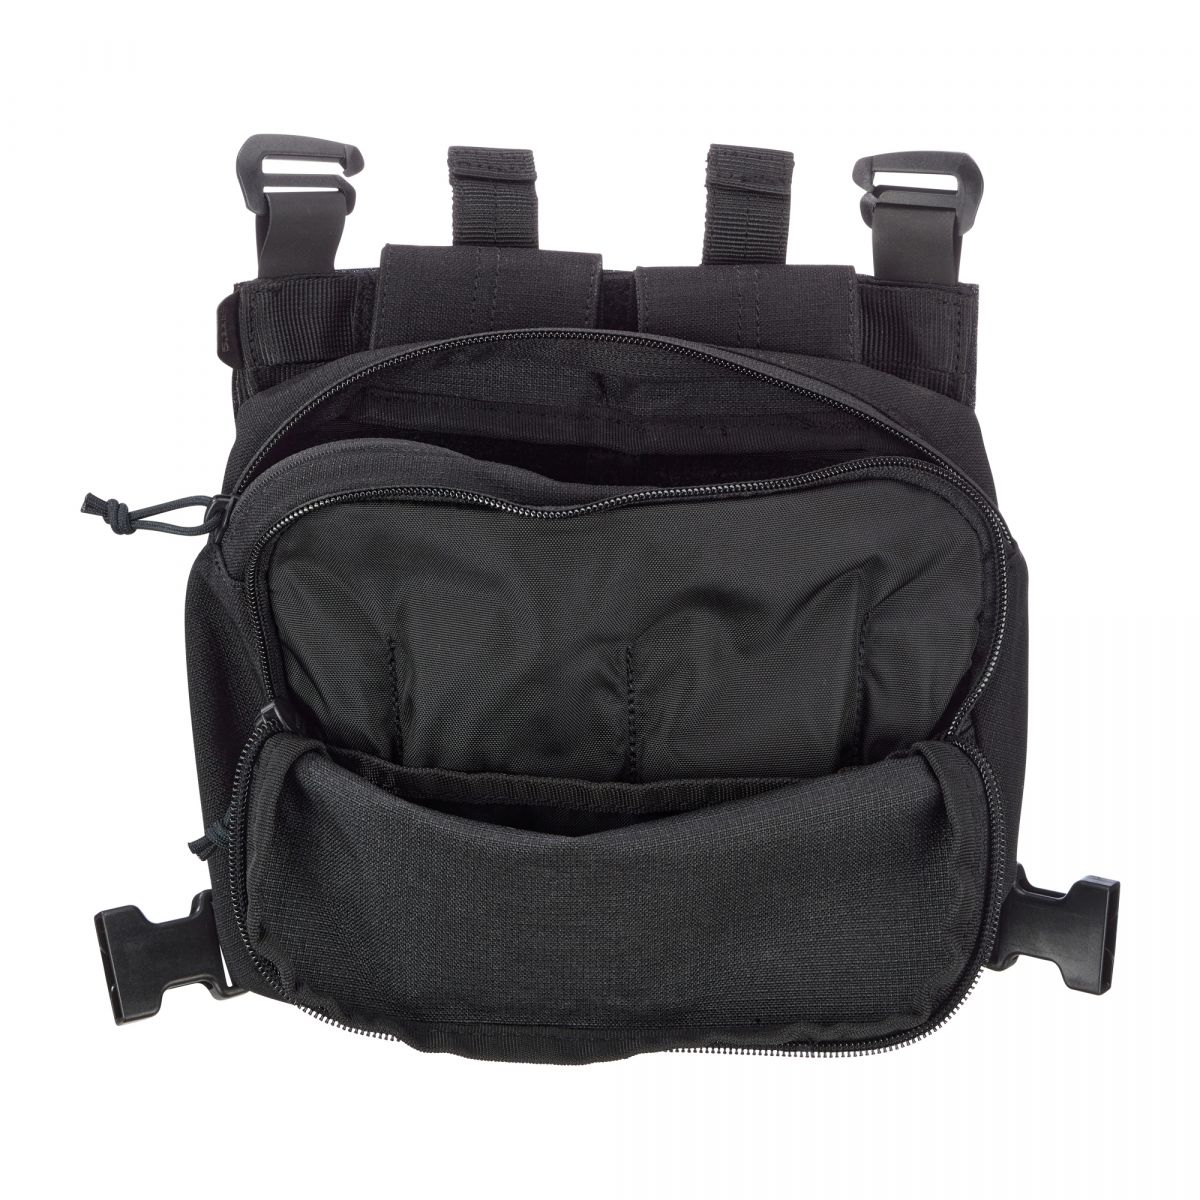 Purchase the 5.11 Pouch 2 Banger Gear Set black by ASMC